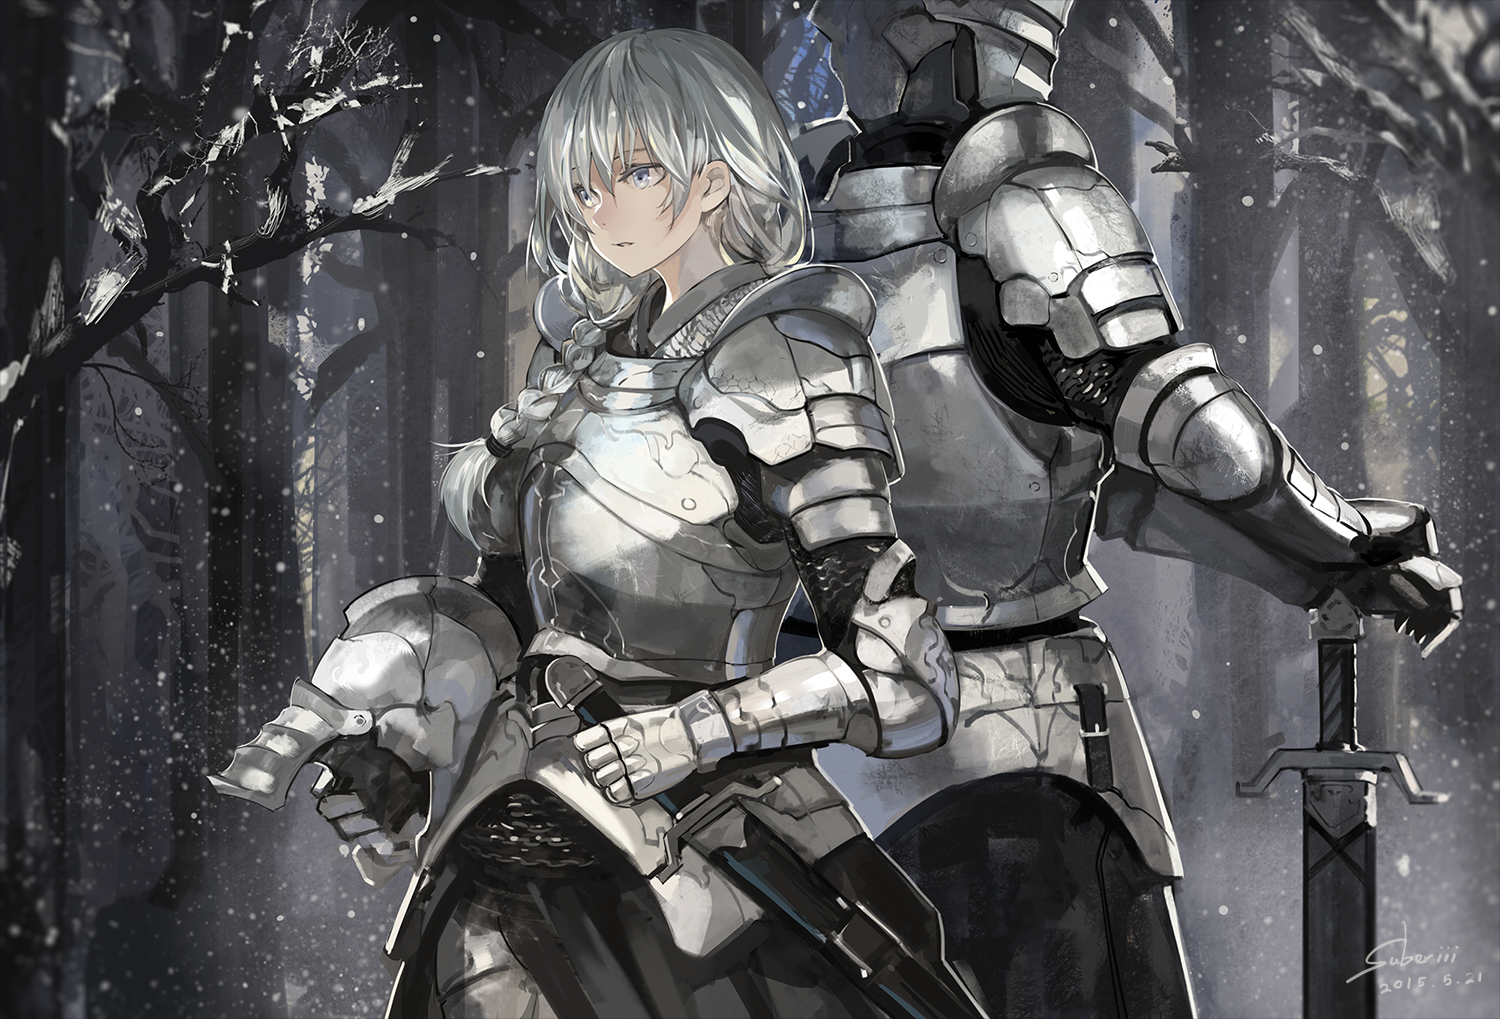 Knights - Anime art, Original character, Anime, Knights, Forest, Winter